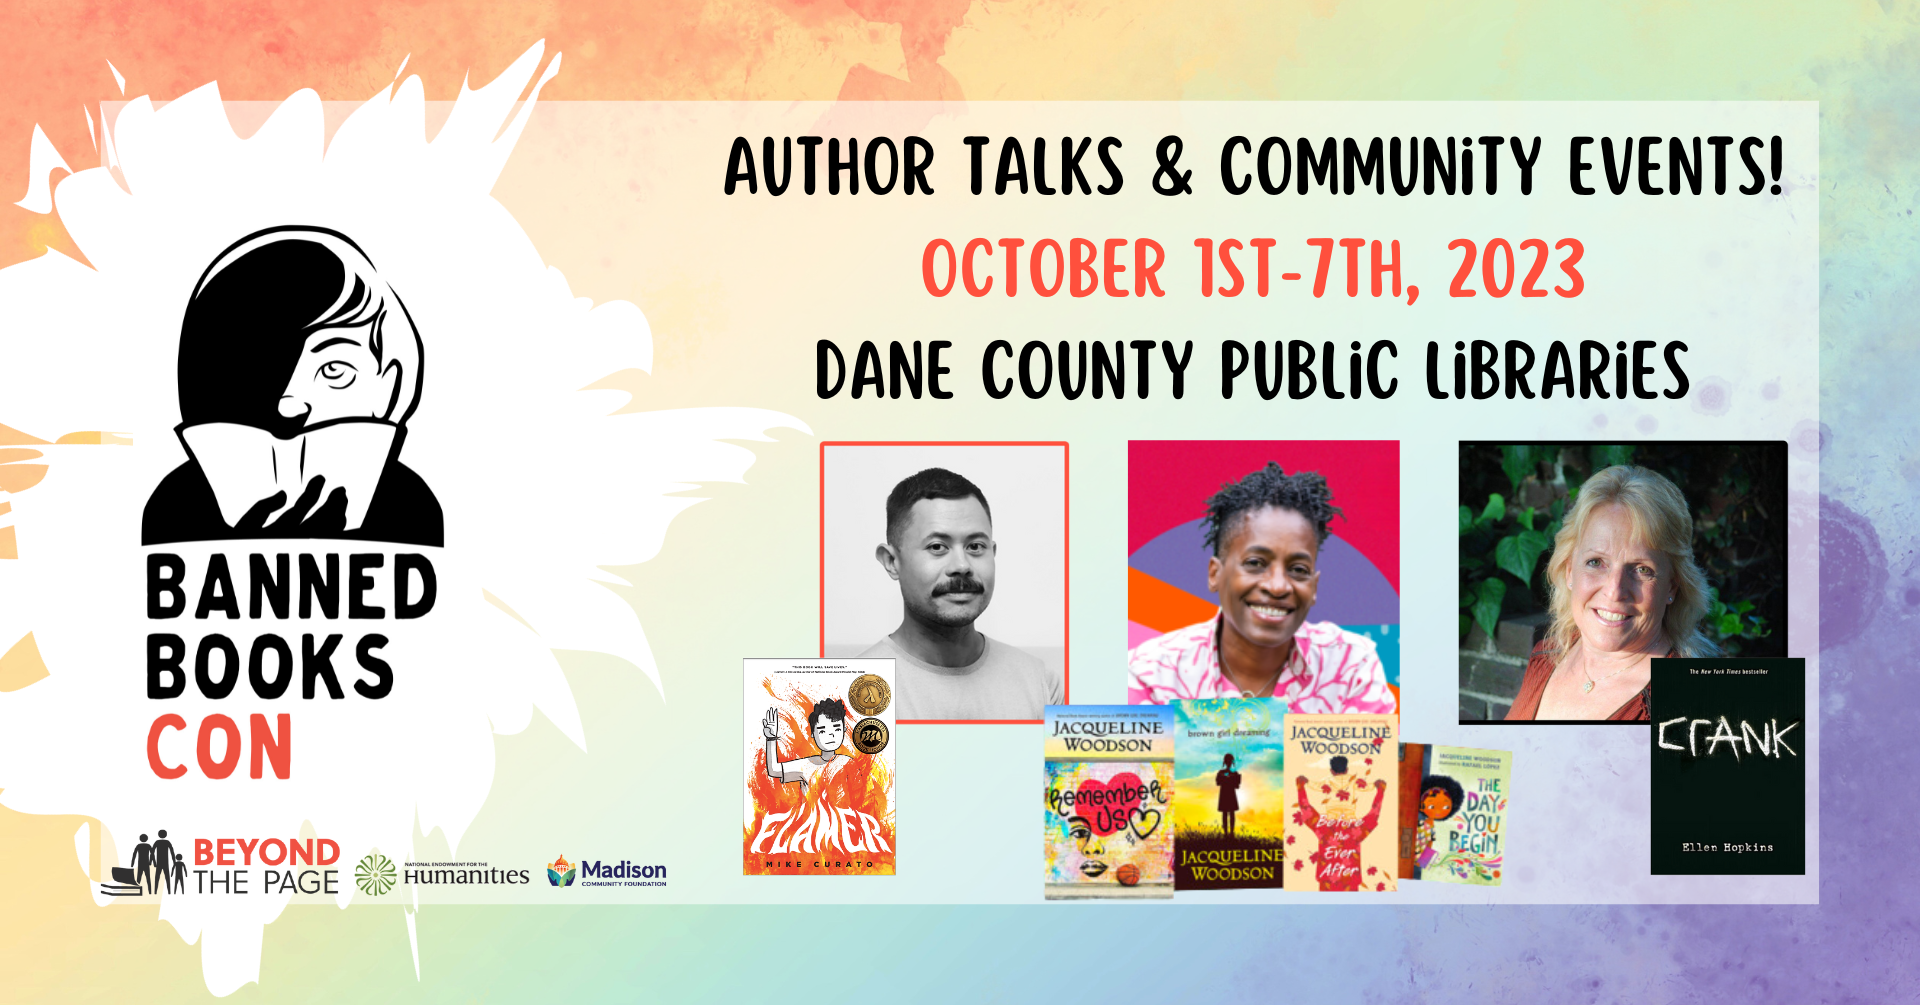 Banned Books Con banner with images of Mike Curato, Jaqueline Woodson and Ellen Hopkins